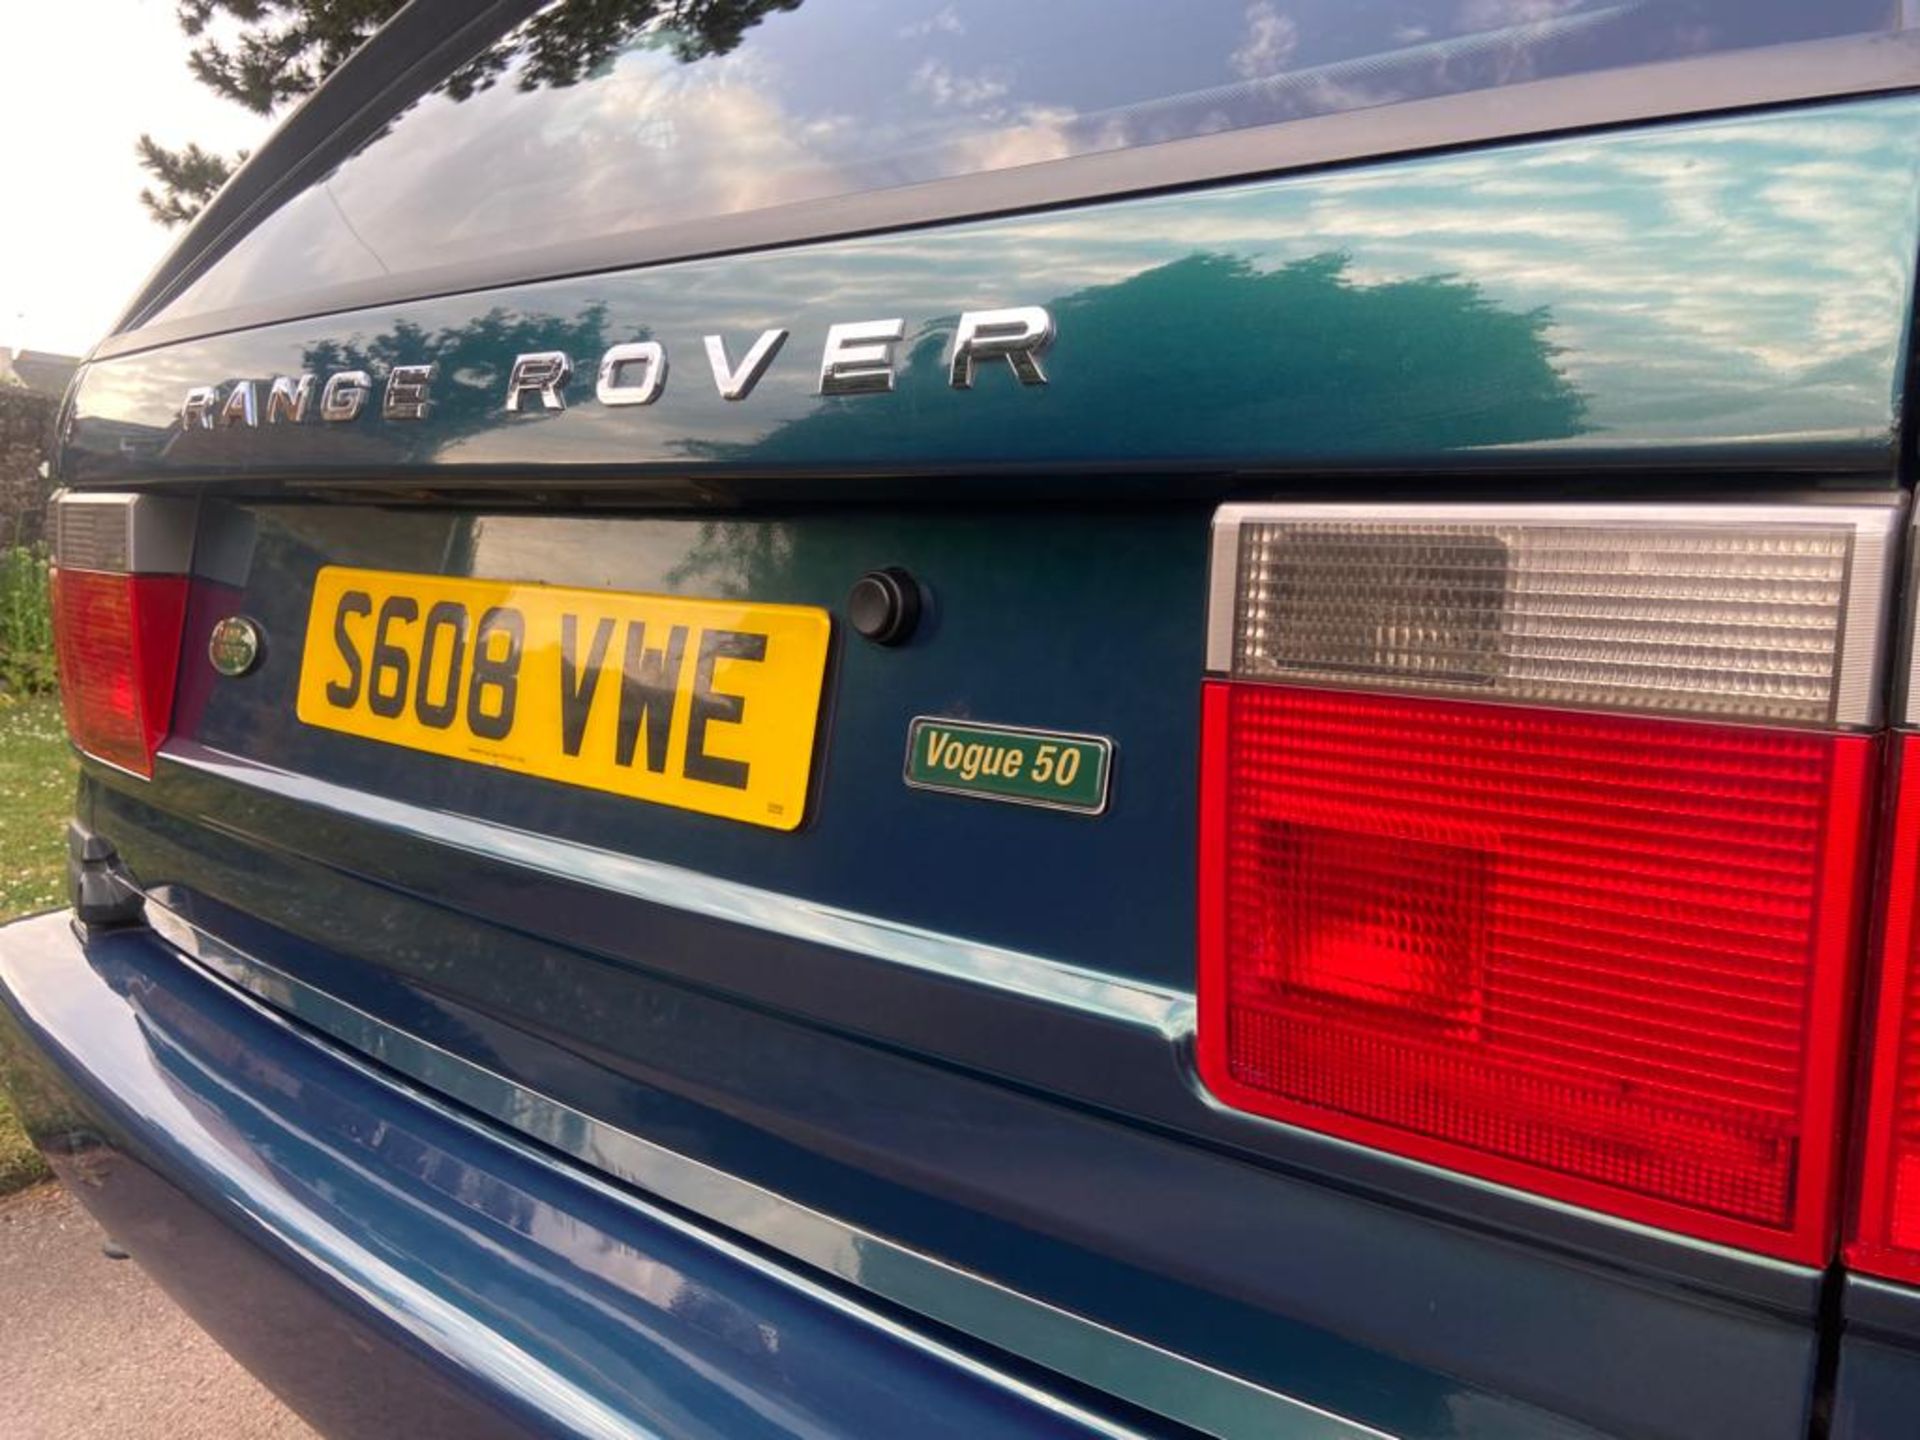 1998 Limited Edition Range Rover P38 - Image 28 of 39